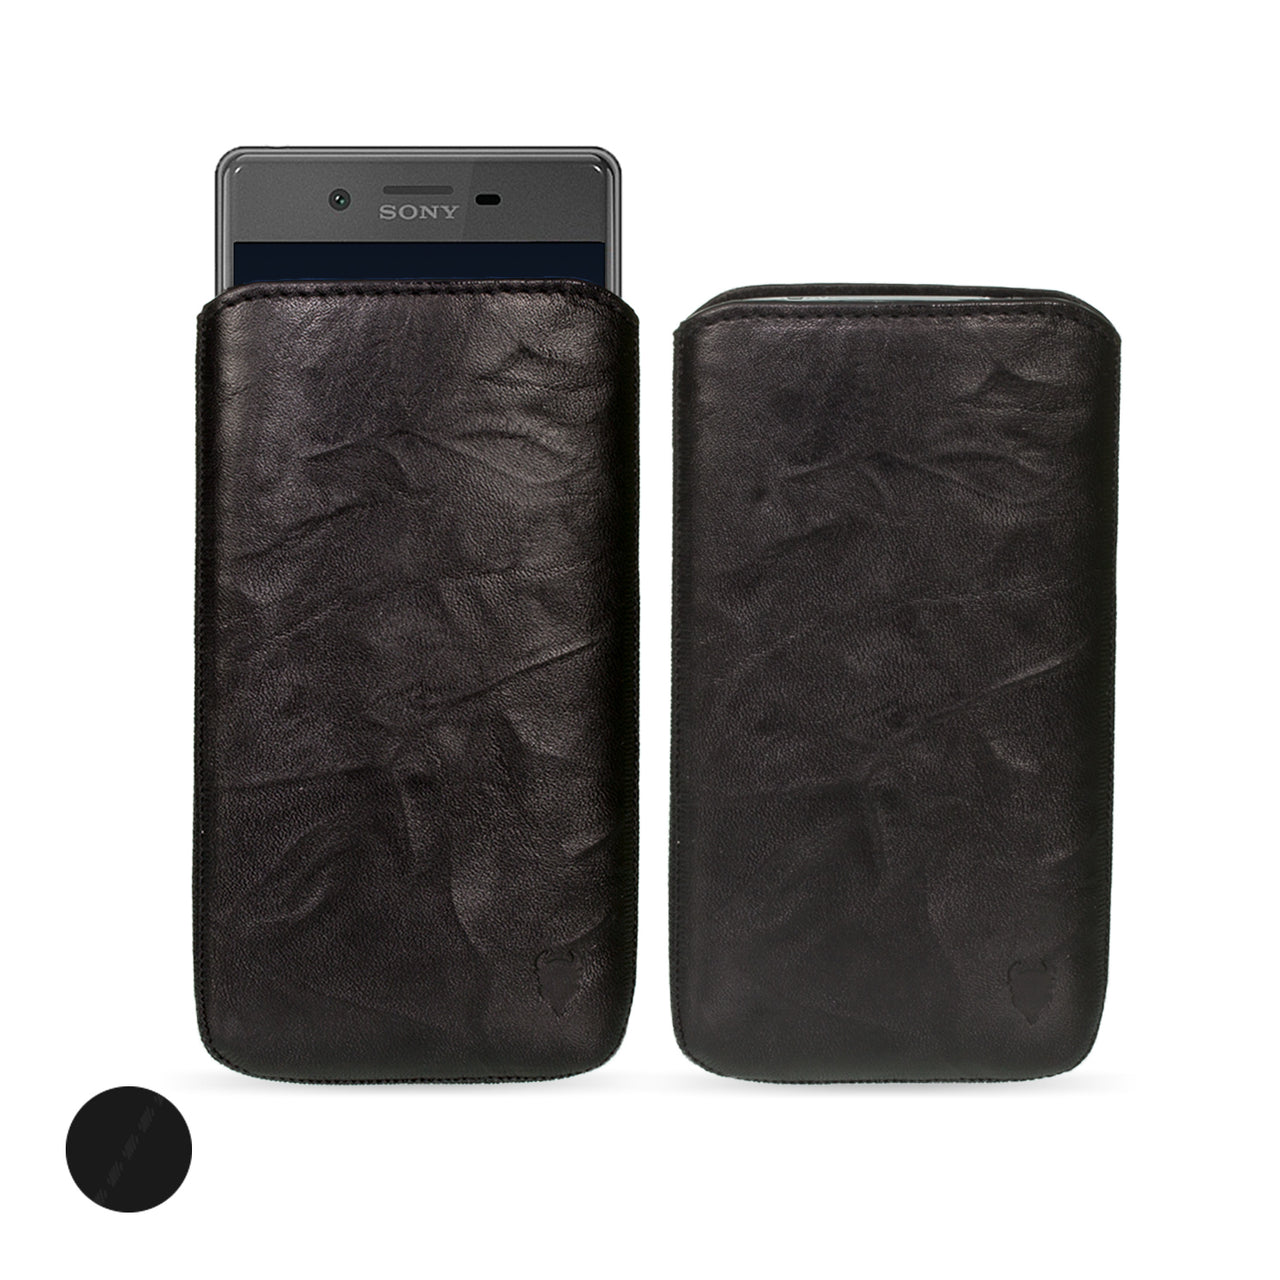 Sony Xperia X Genuine Leather Pouch Sleeve Case | Artisanpouch